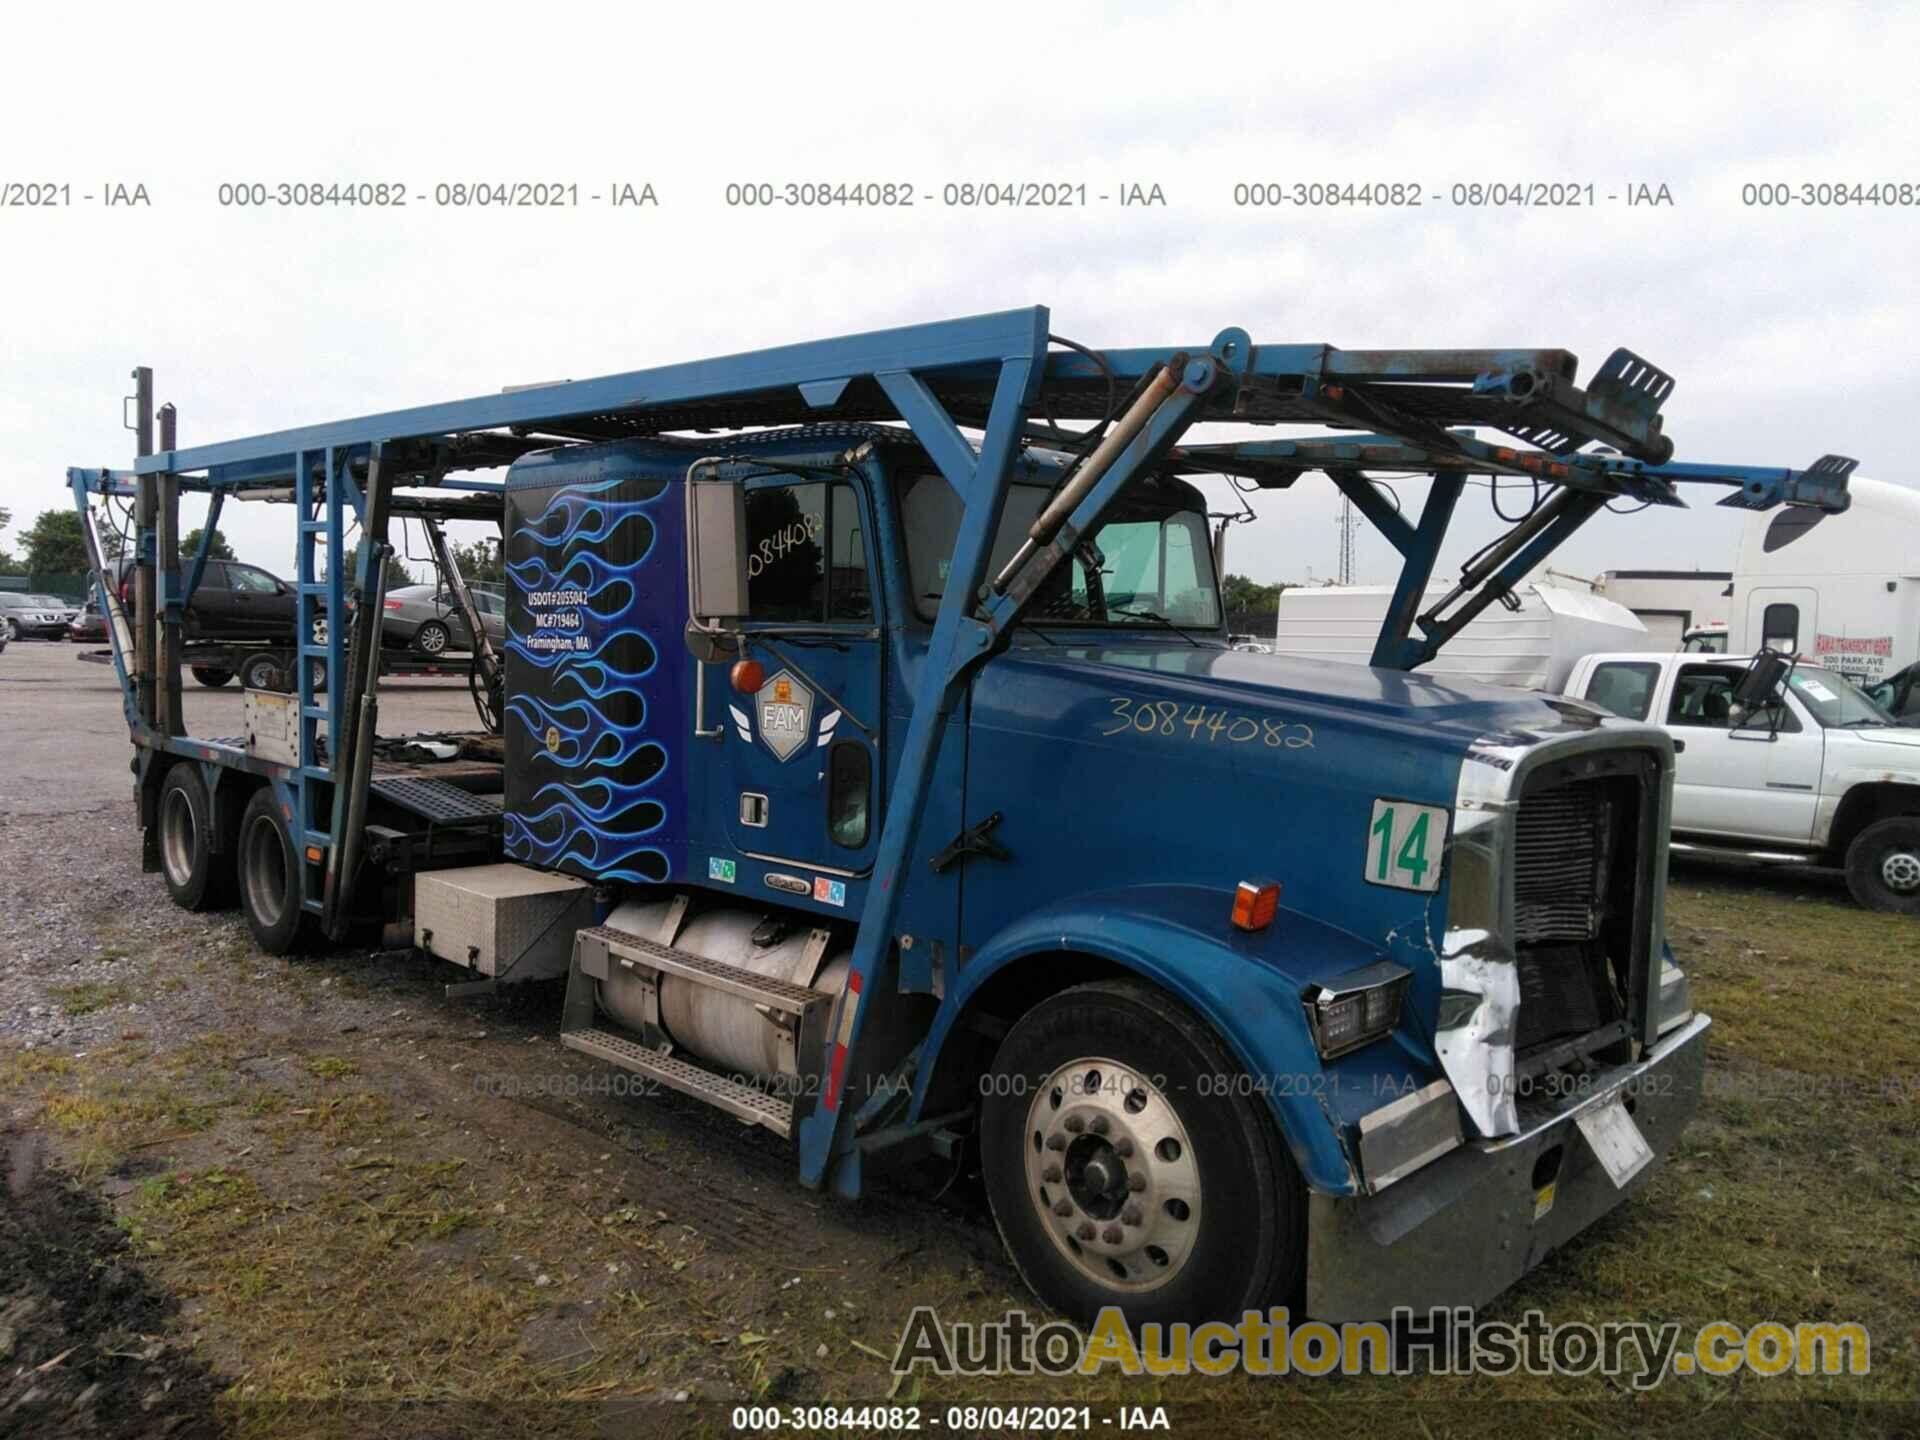 FREIGHTLINER CONVENTIONAL FLD120, 1FVNDXYB3WL925554